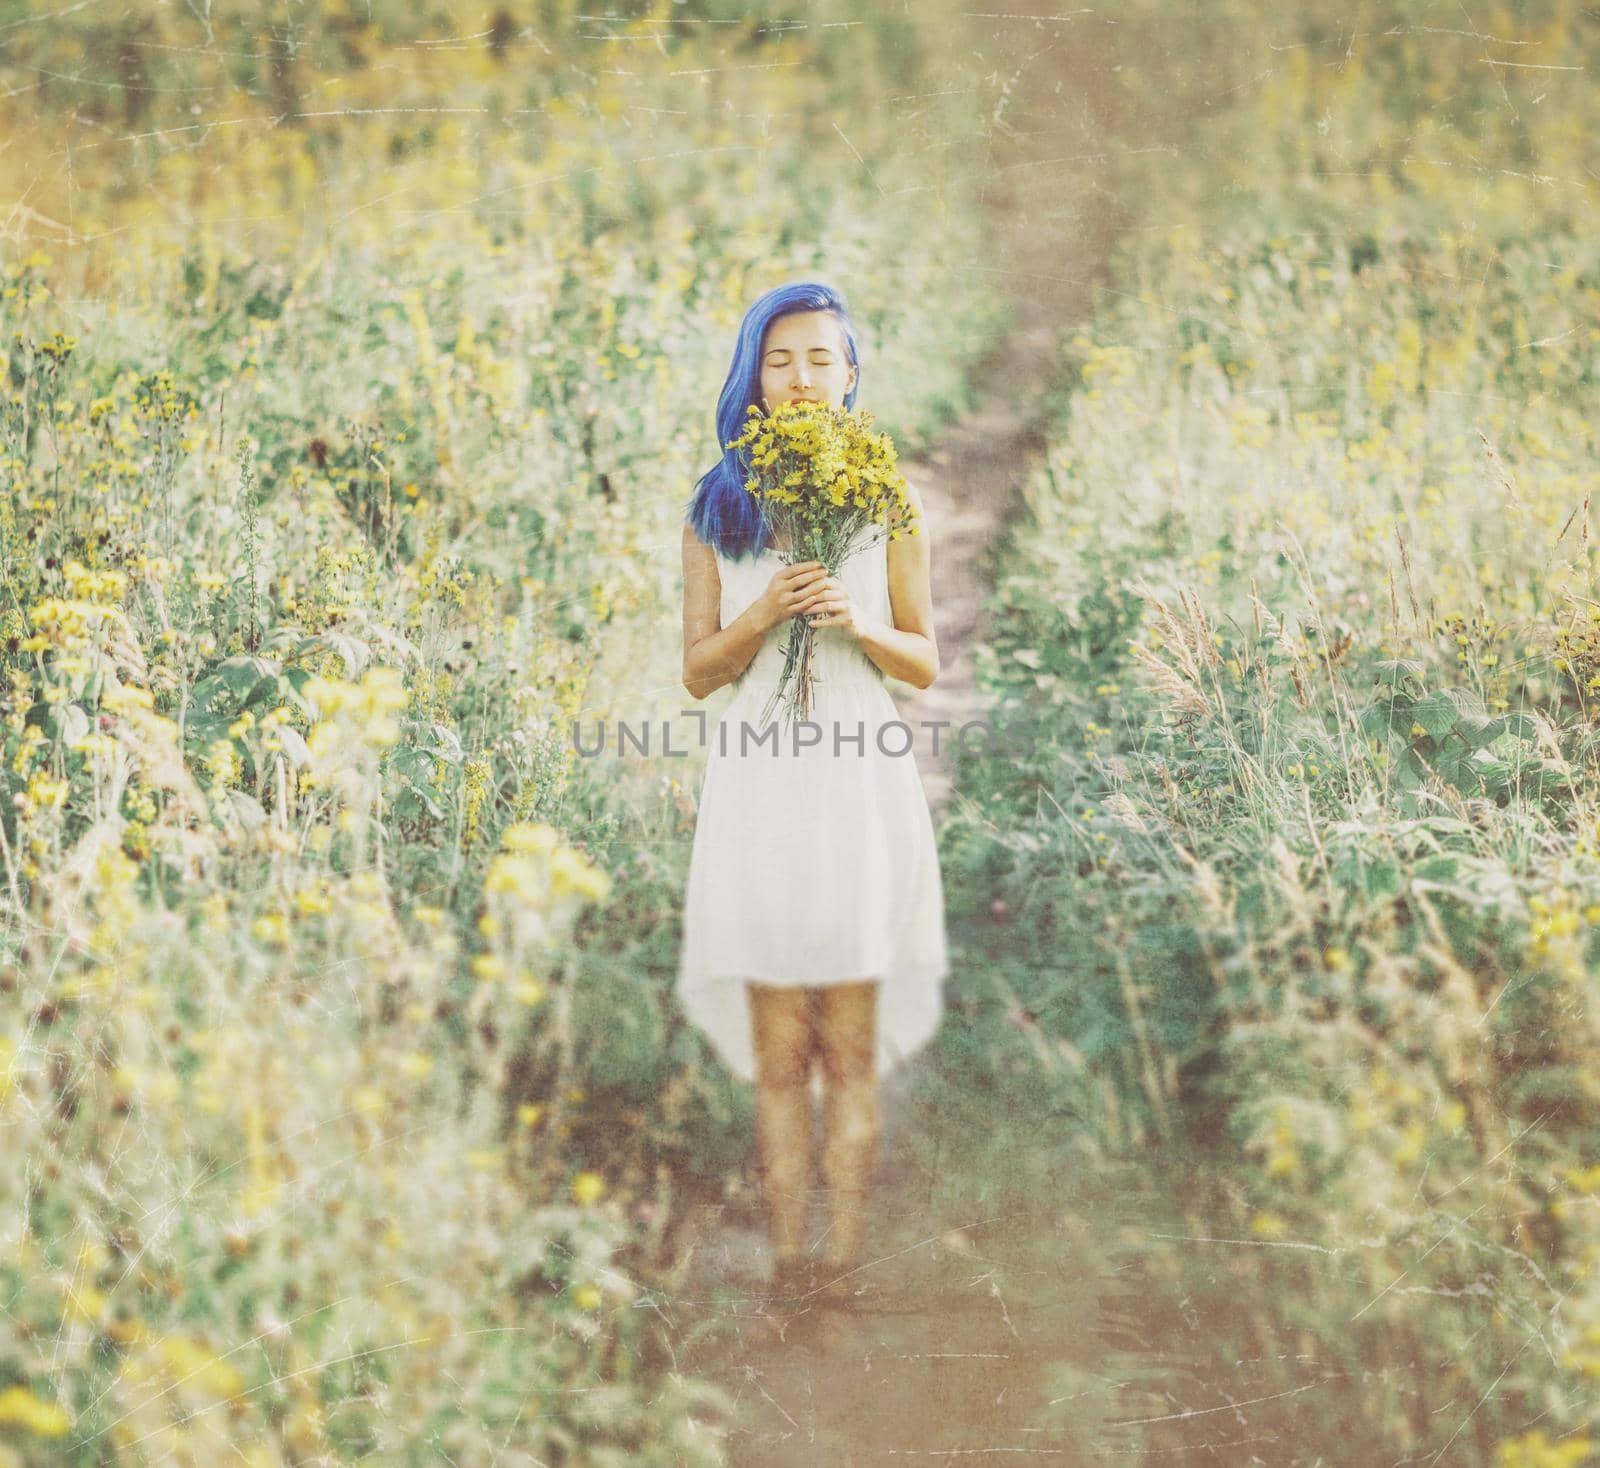 Beautiful young woman with blue hair and a bouquet of summer flowers standing in a field. Image with old textured effect.